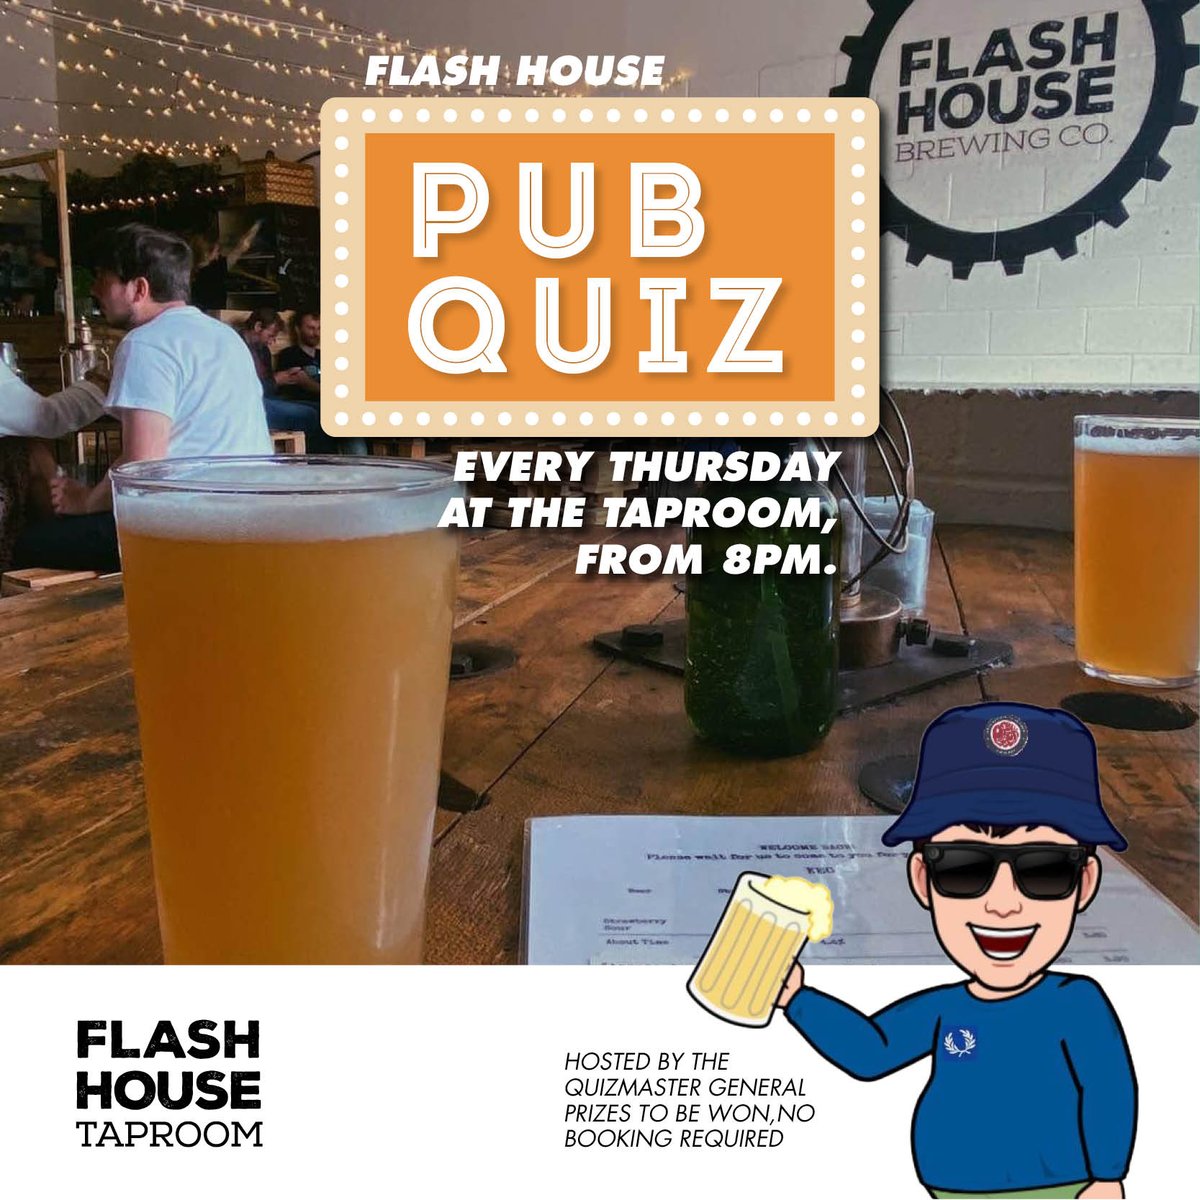 Yes, we are finally doing it! 🗓️ Every Thursday 🕗 8pm (with approximate finish time of 10-10:30pm) No bookings, just turn up to secure your spot! Prizes to be won if you're smart 📚 Hosted by the pros @thequizmastergeneral ! 🎙️ See you there!